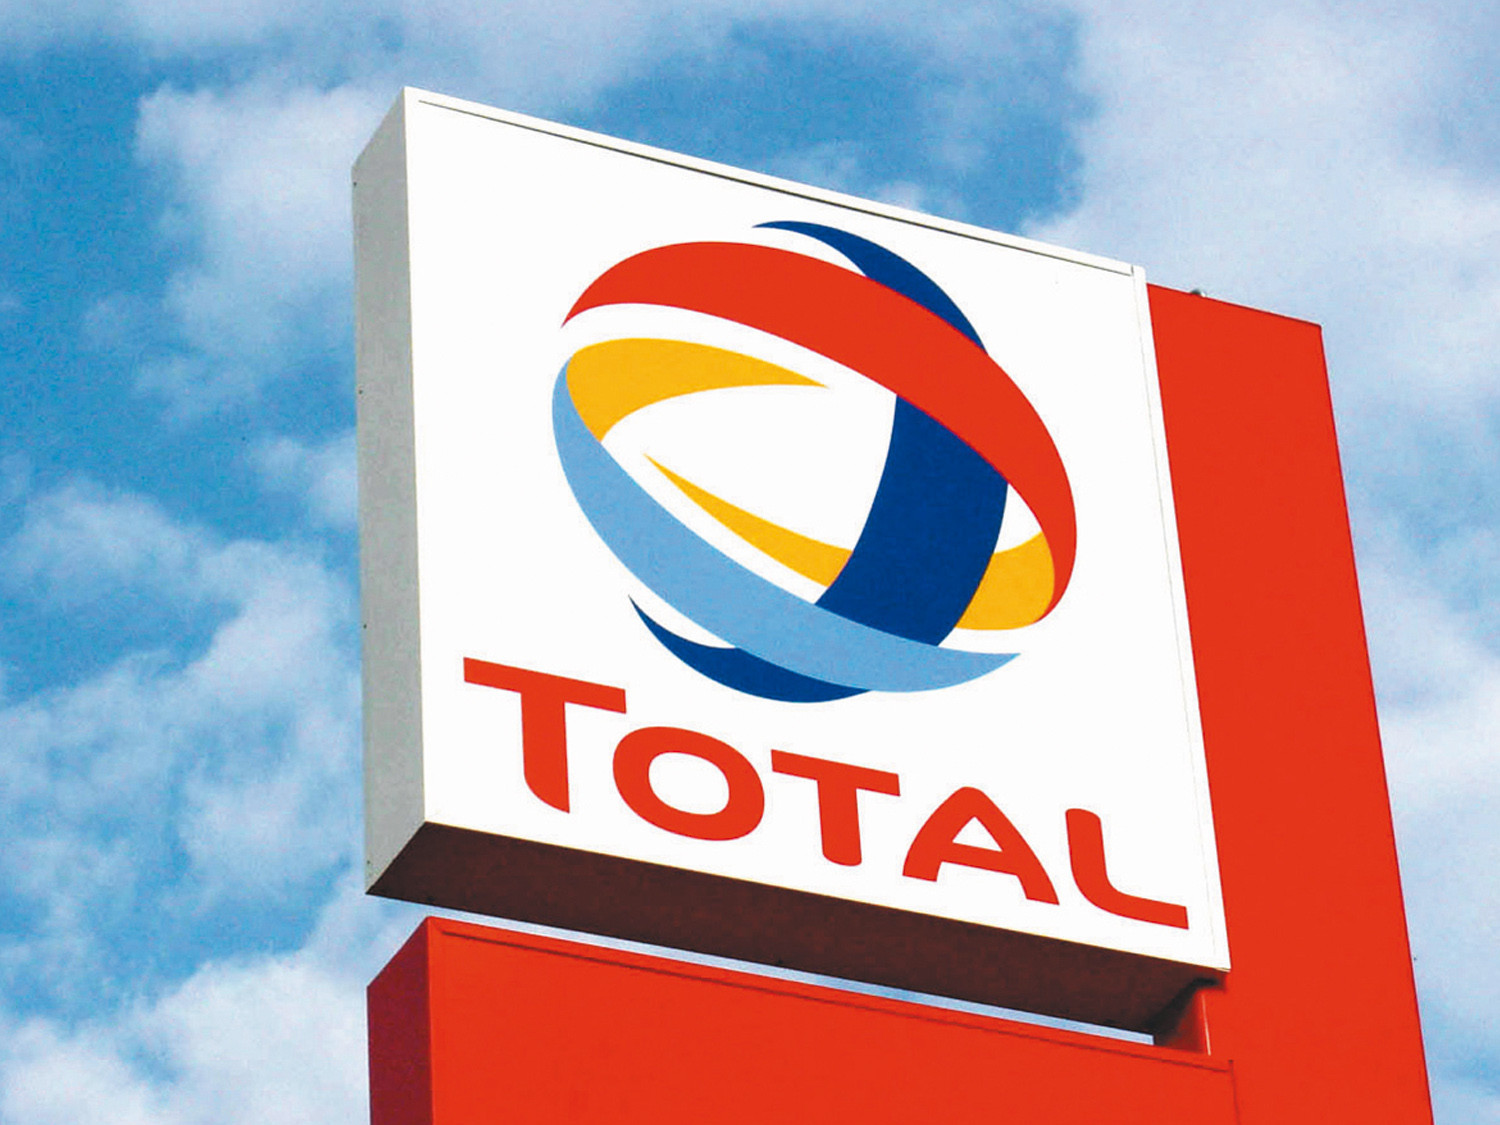 Energy giant Total drops plans to bid to be Paris 2024 sponsor due to "green Games" focus